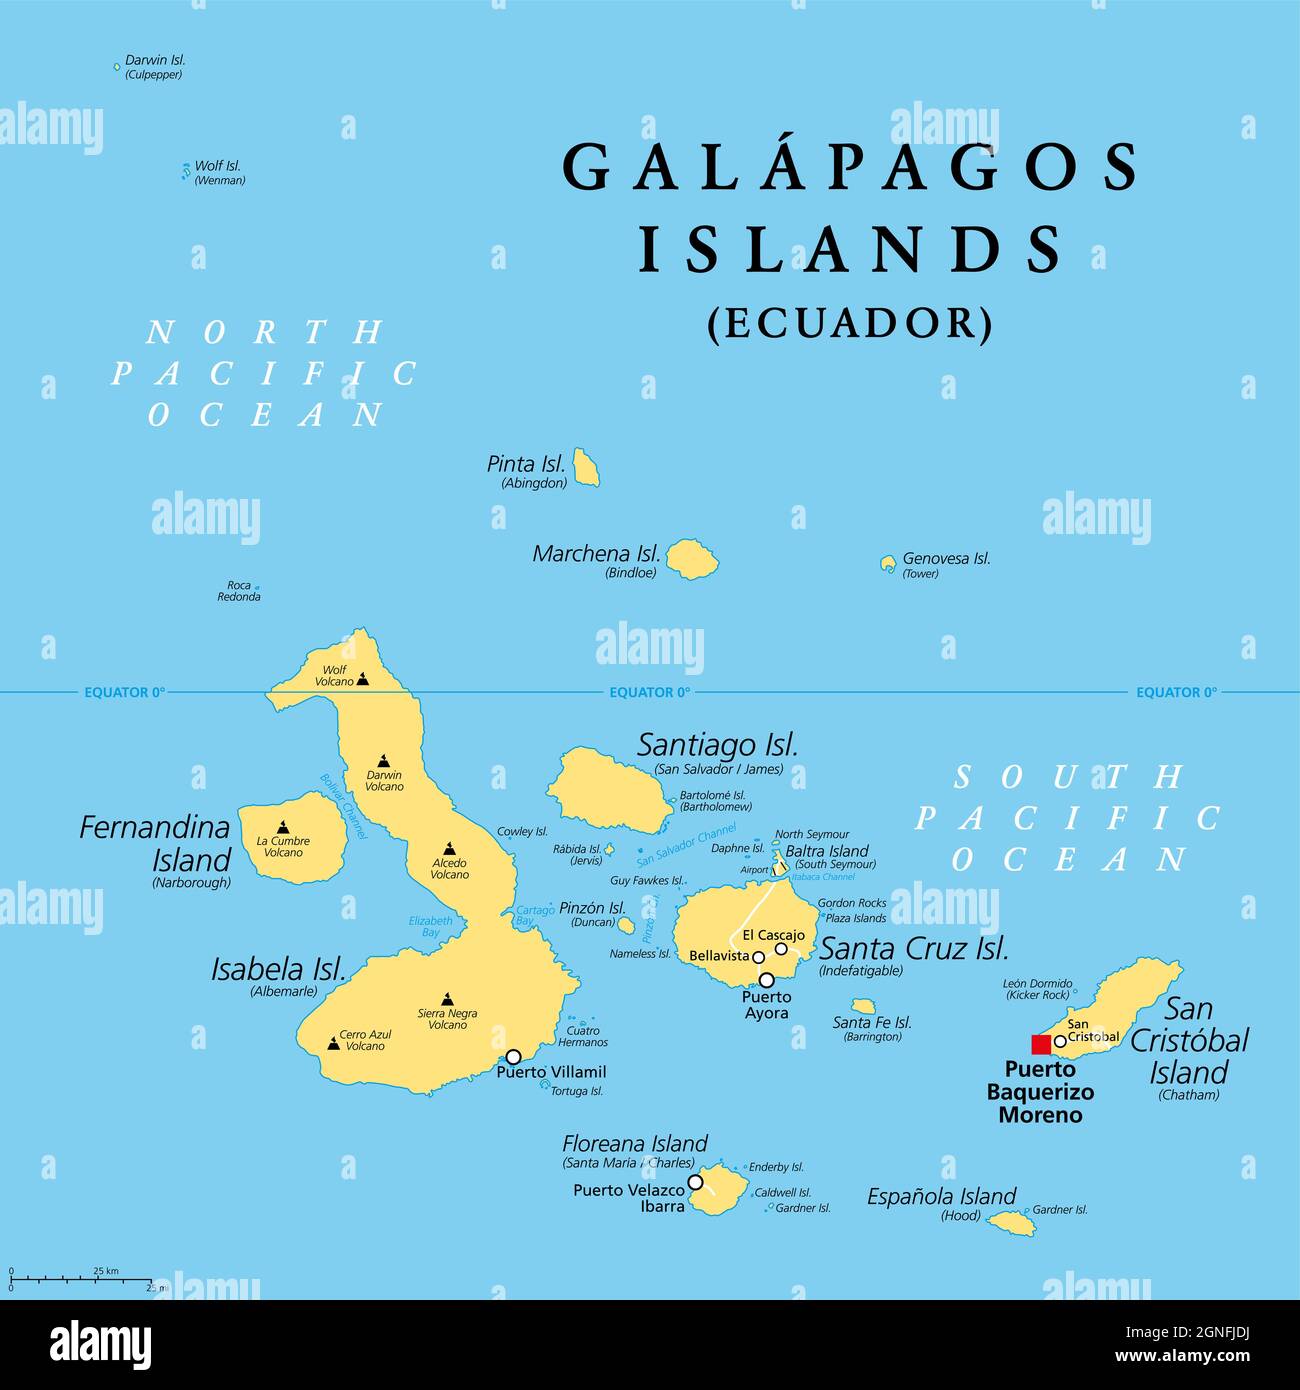 Galapagos Islands, Ecuador, political map with capital Puerto Baquerizo Moreno. Archipelago of volcanic islands on either equator side in the Pacific. Stock Photo